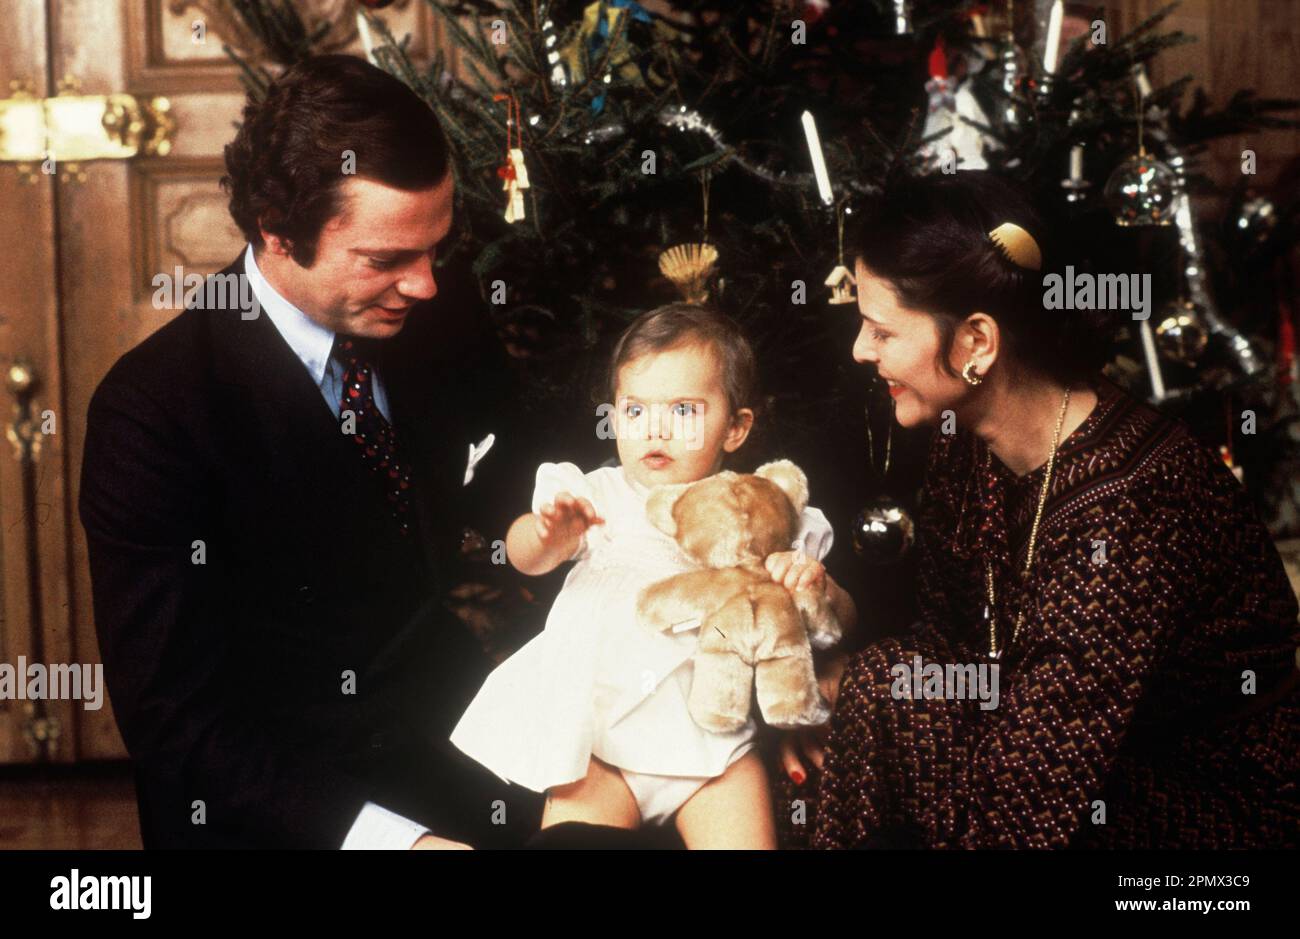 Swedish royal family in the 1970s. King Carl XVI Gustaf with queen Silvia and their daughter crownprincess Victoria in front of the christmas tree in the royal castle in Stockholm Sweden 1978. Stock Photo